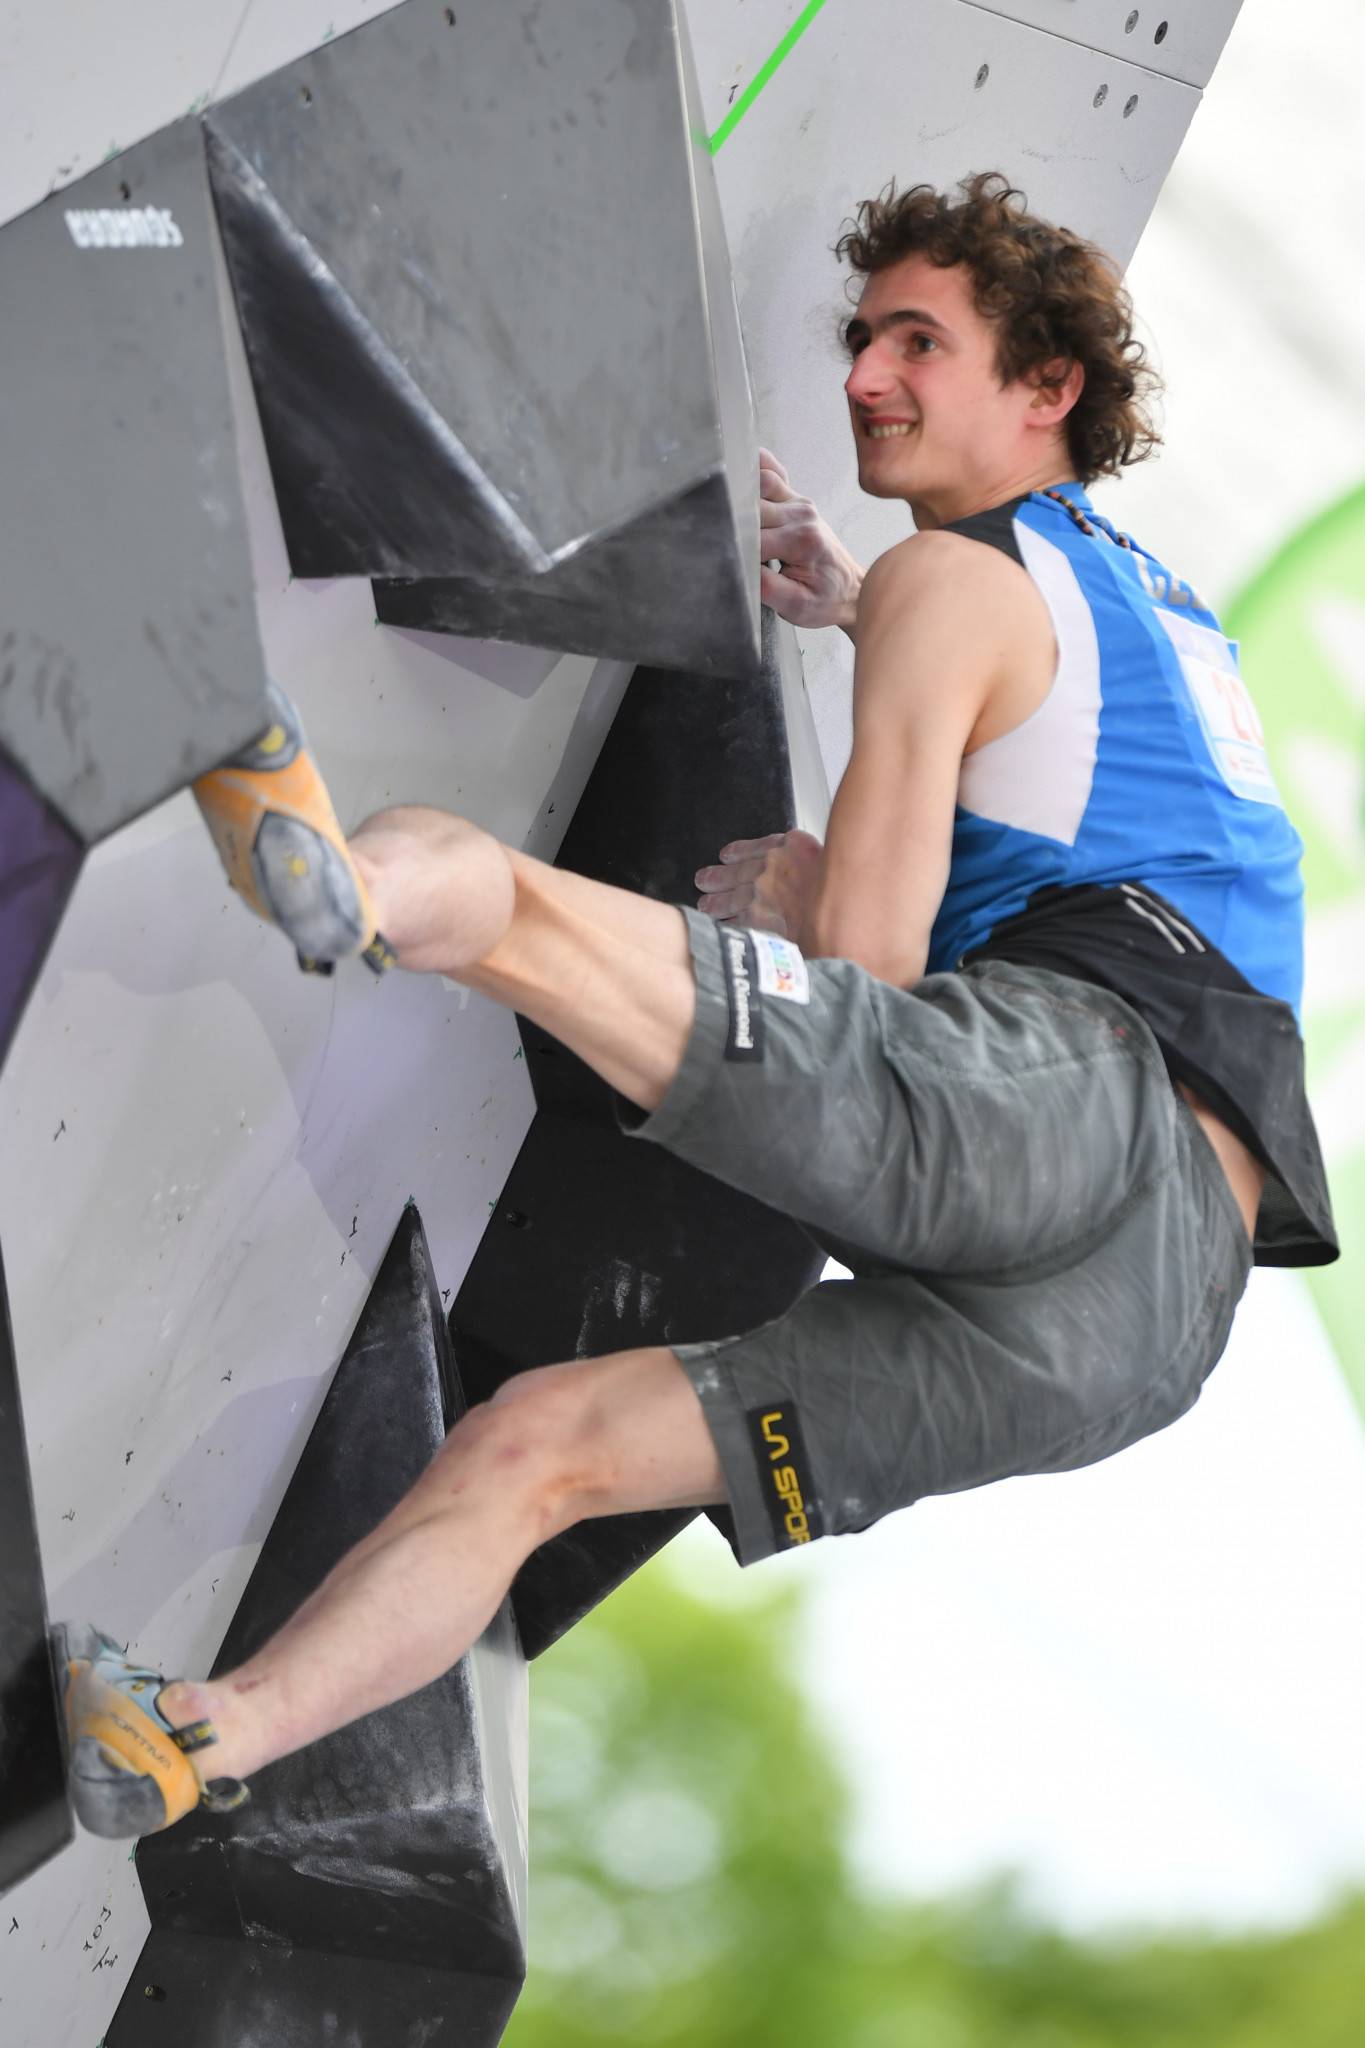 Adam Ondra qualified for the IFSC Bouldering World Cup semi-finals in Colorado, United States in second place ©Getty Images